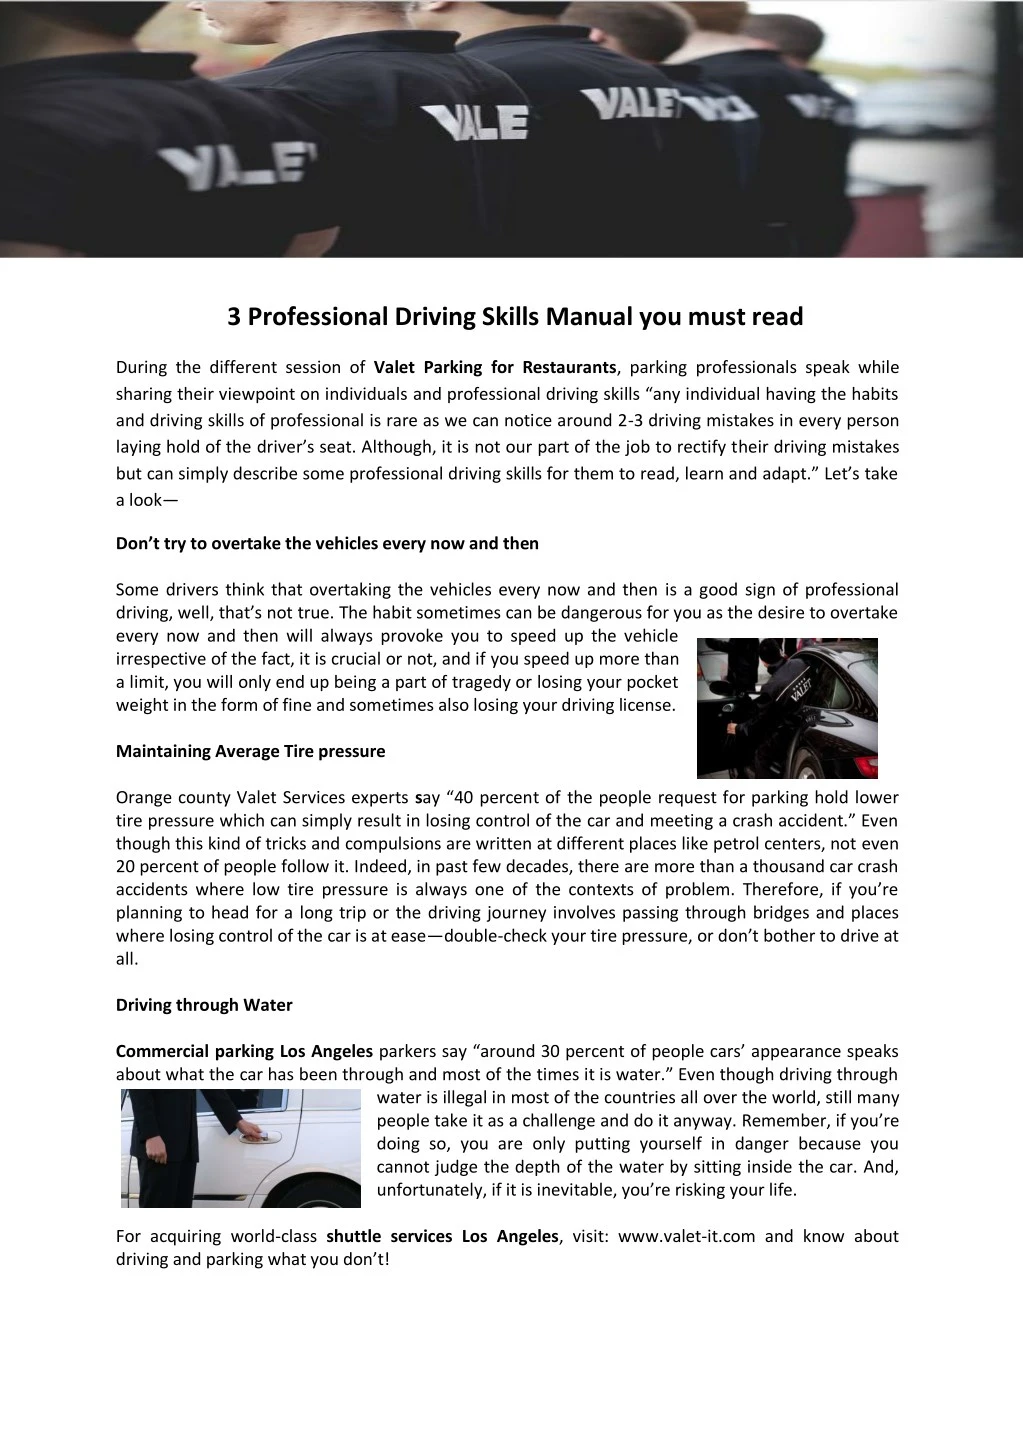 3 professional driving skills manual you must read